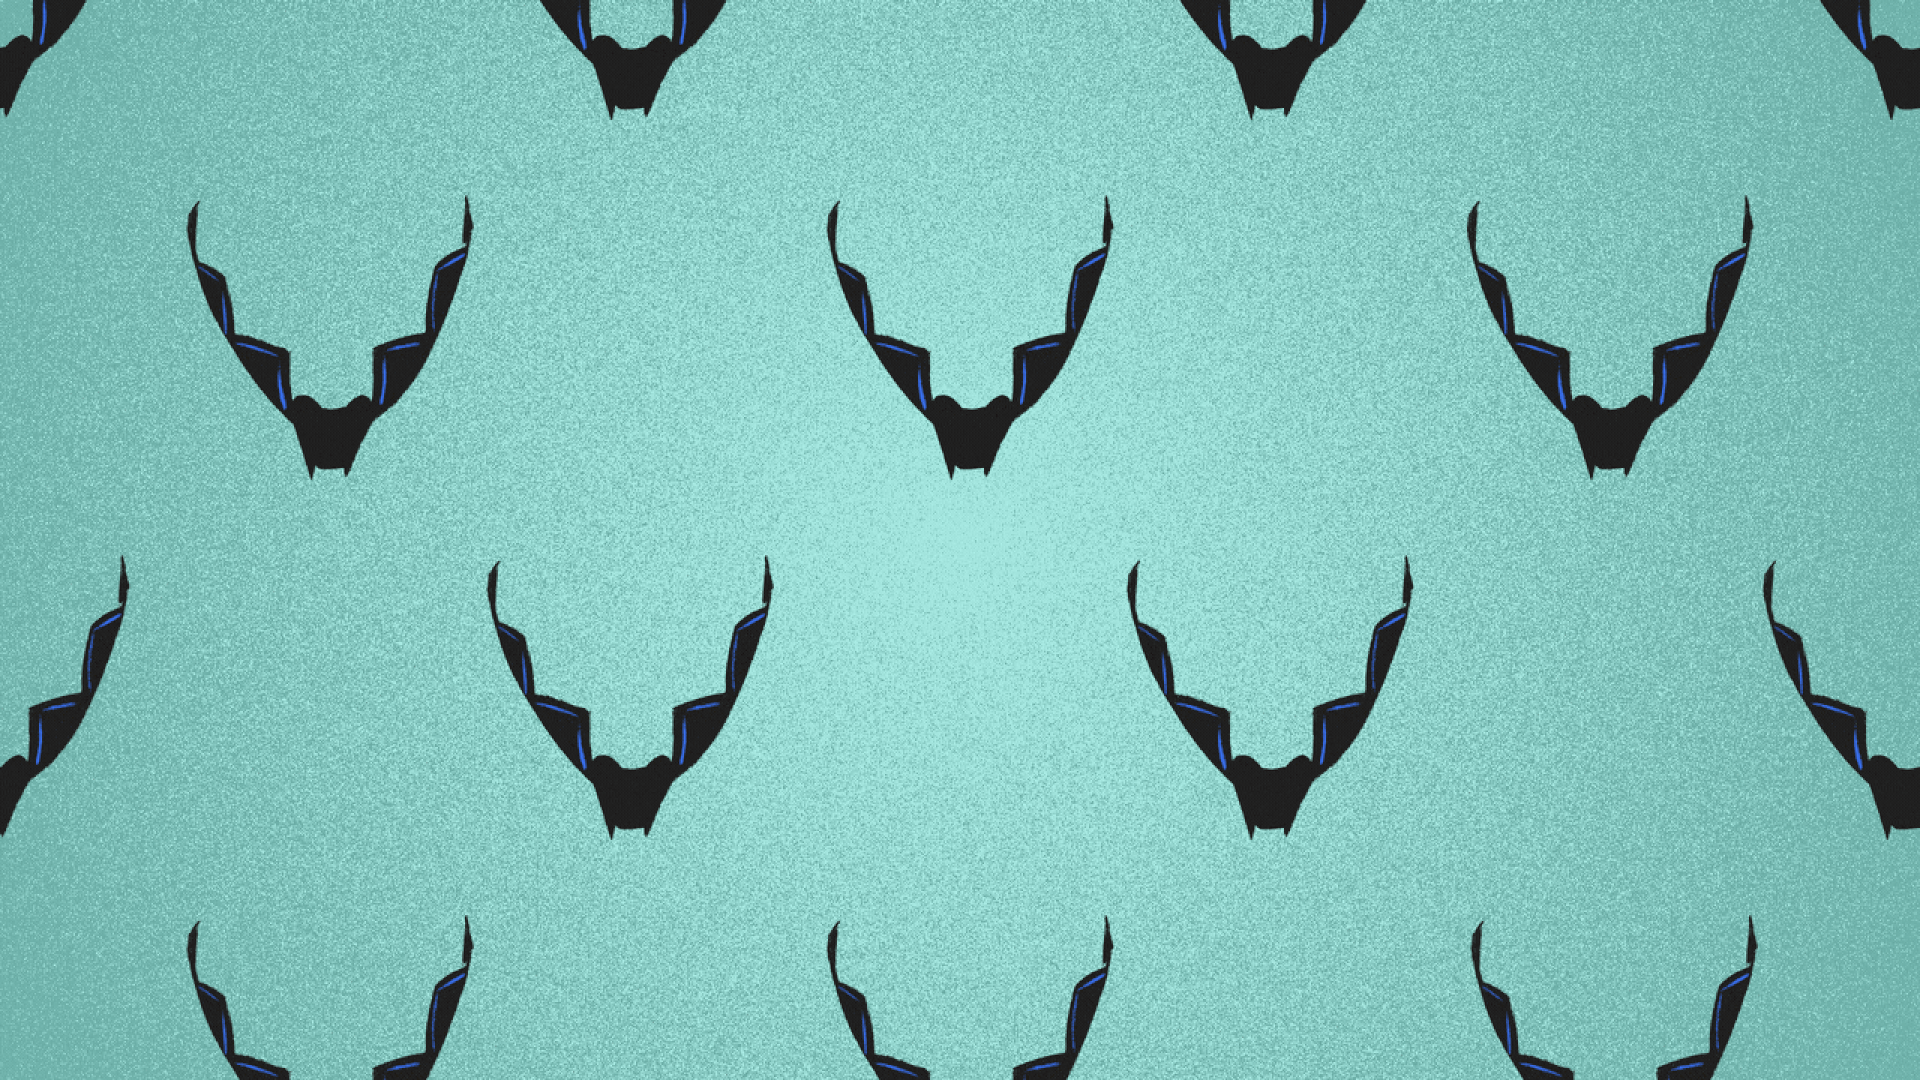 Illustration of a pattern of bats that turn into the Axios logo.